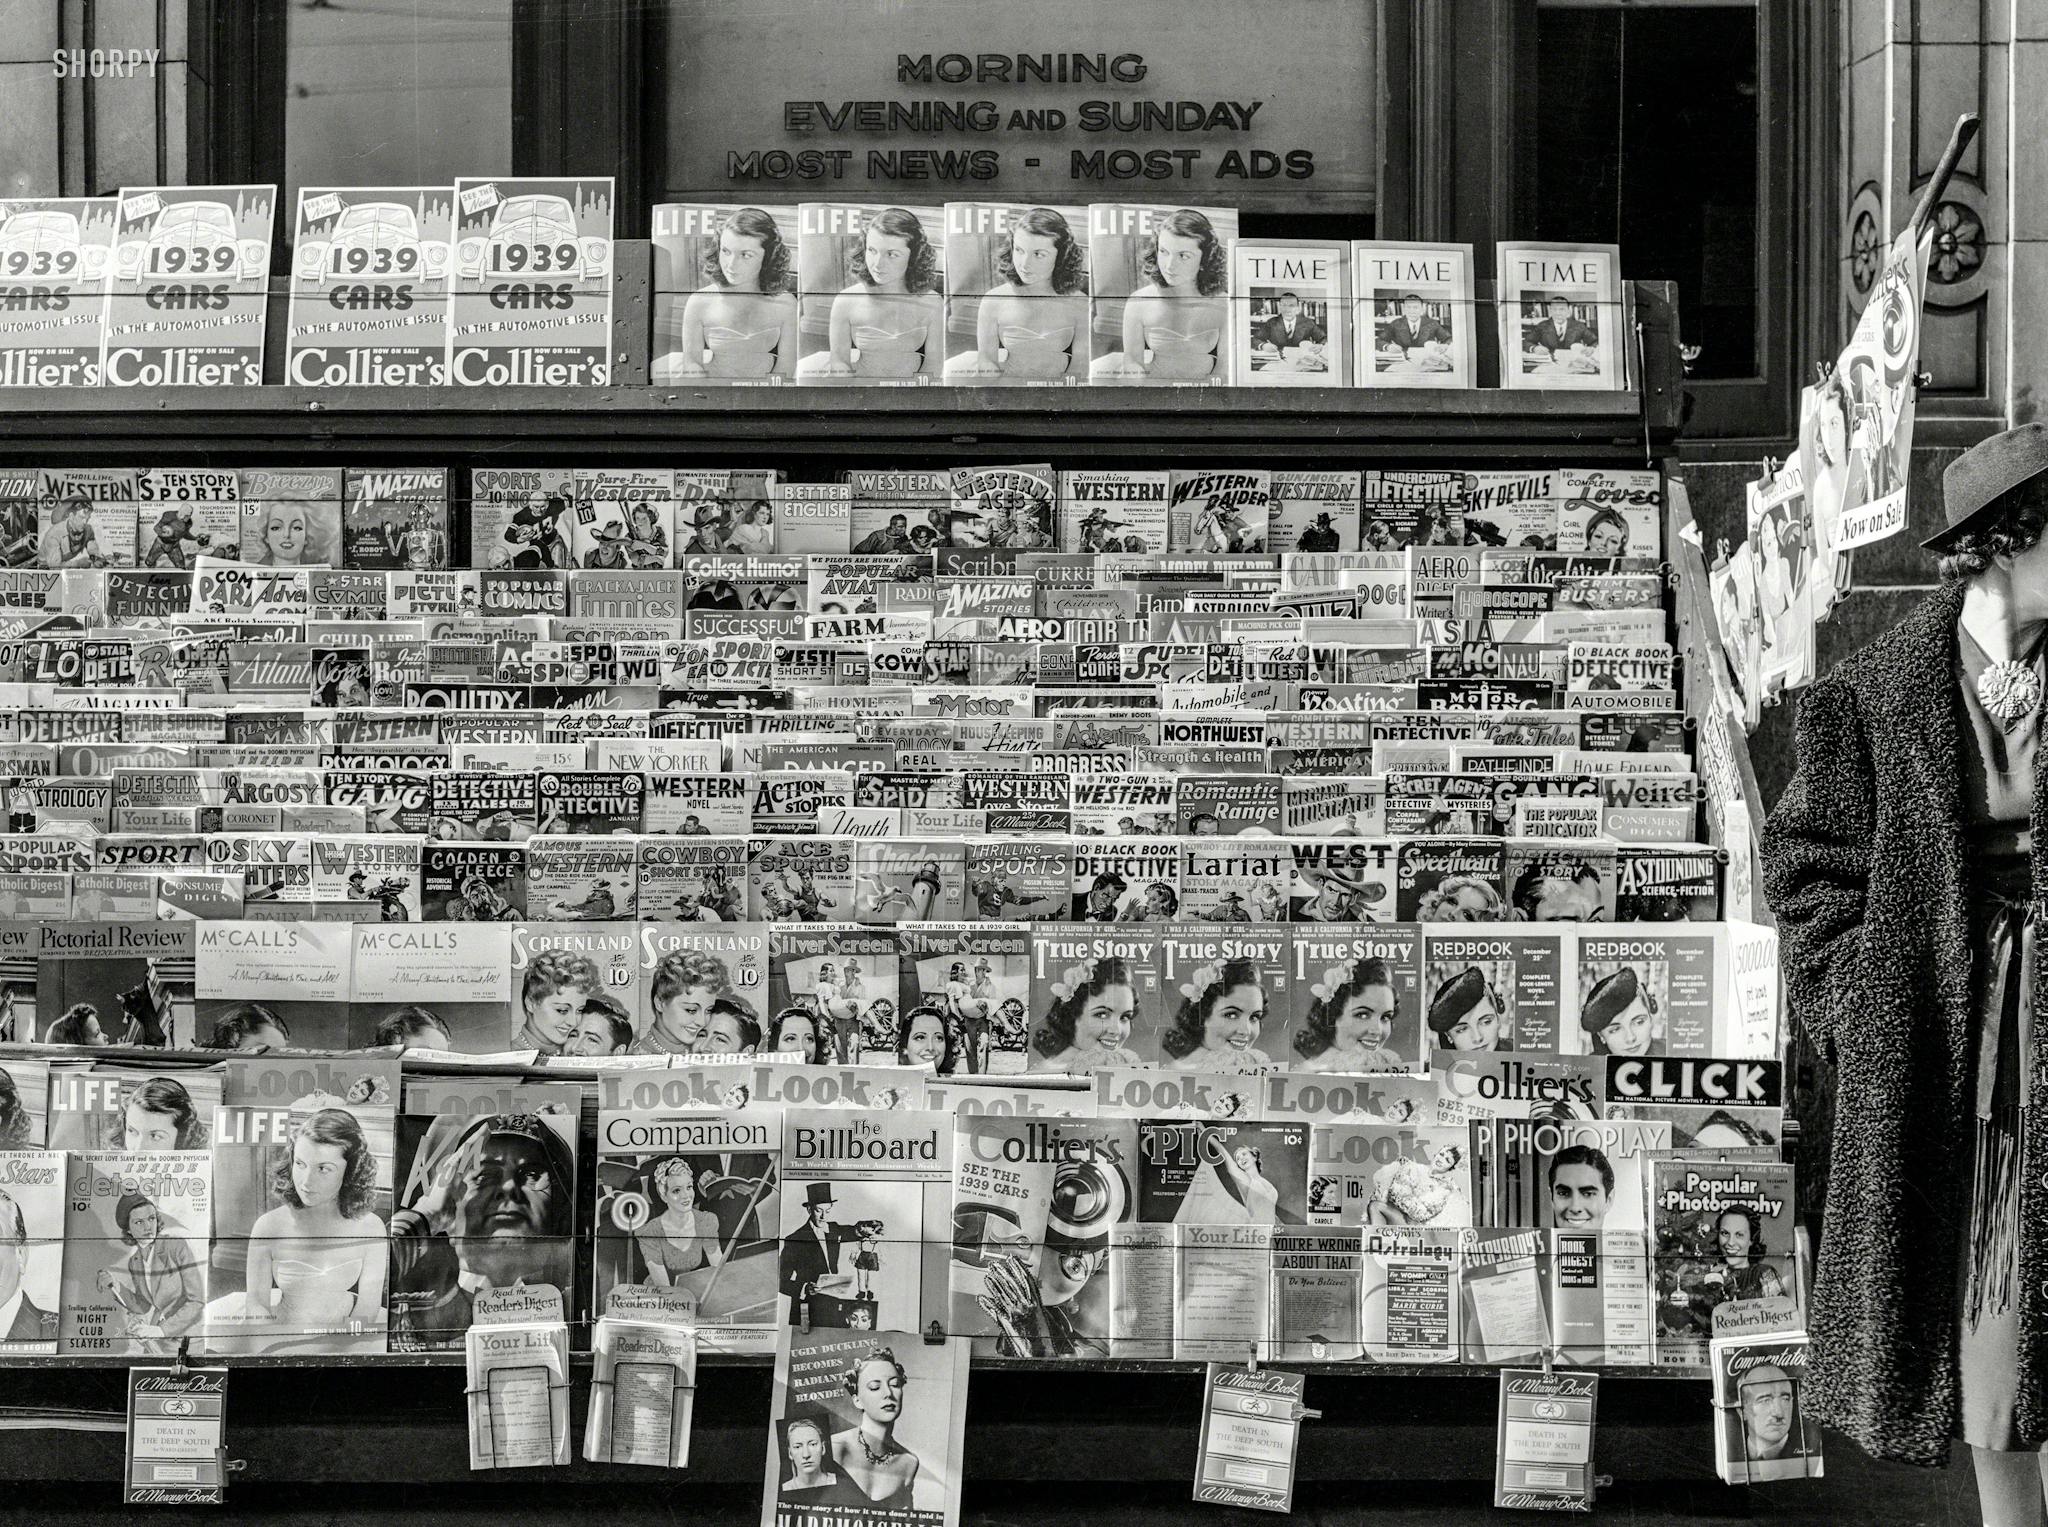 Dissecting the 1% Prediction of Magazine Sales